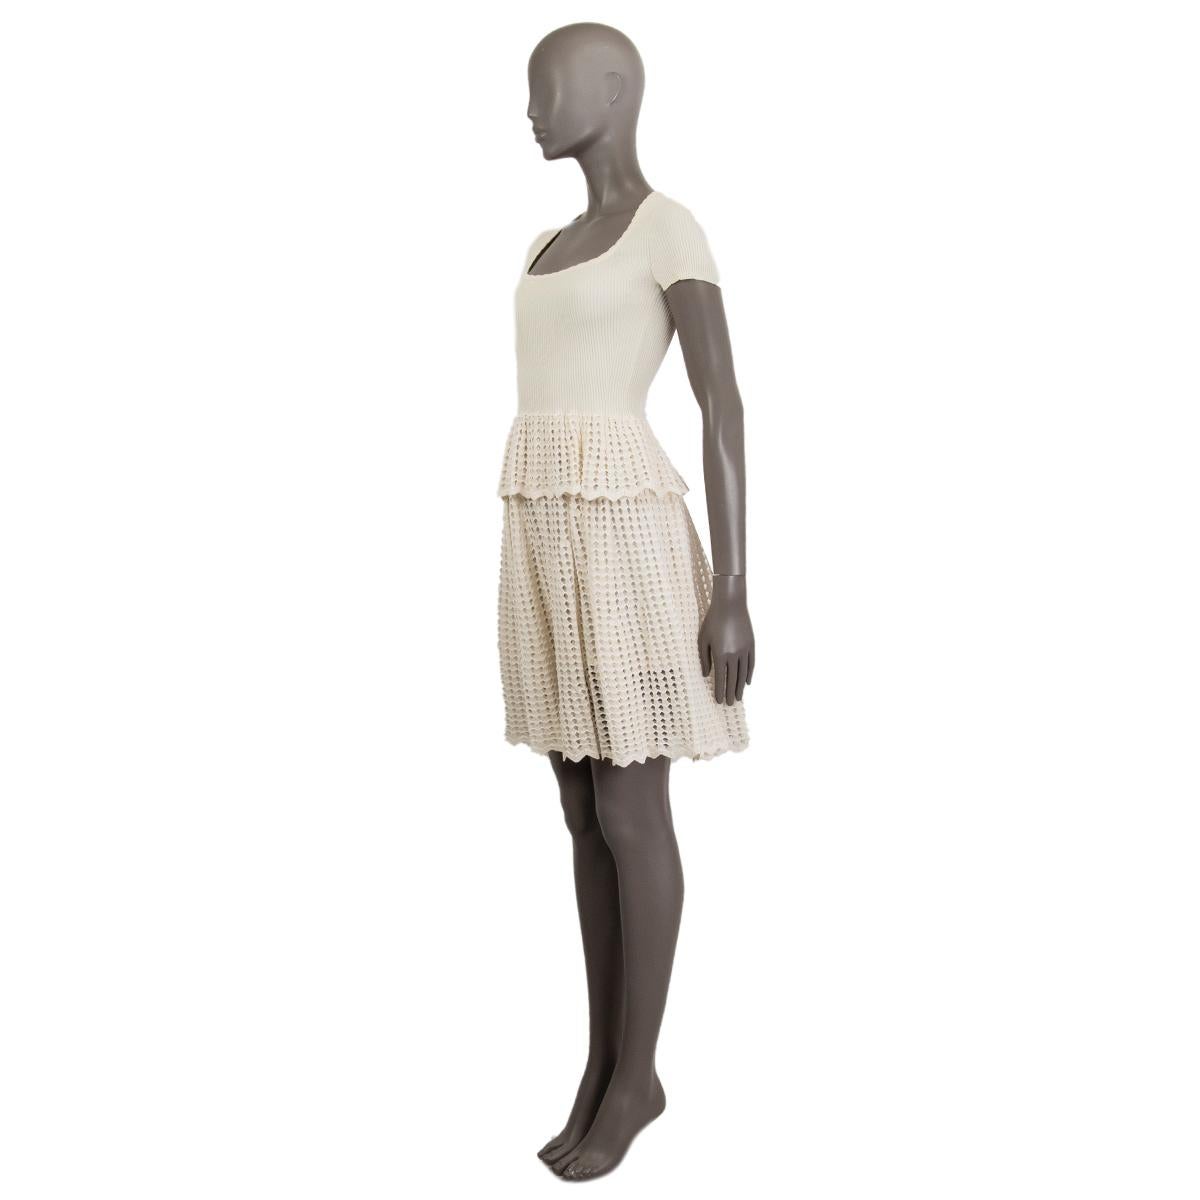 Alexander McQueen ribbed and open knit peplum dress in cream polyamide (43%), cotton (37%), viscose (11%), nylon (5%) and polyester (4%). Has short sleeves and a solid knit skirt. Has been worn and is in excellent condition.

Tag Size S
Size